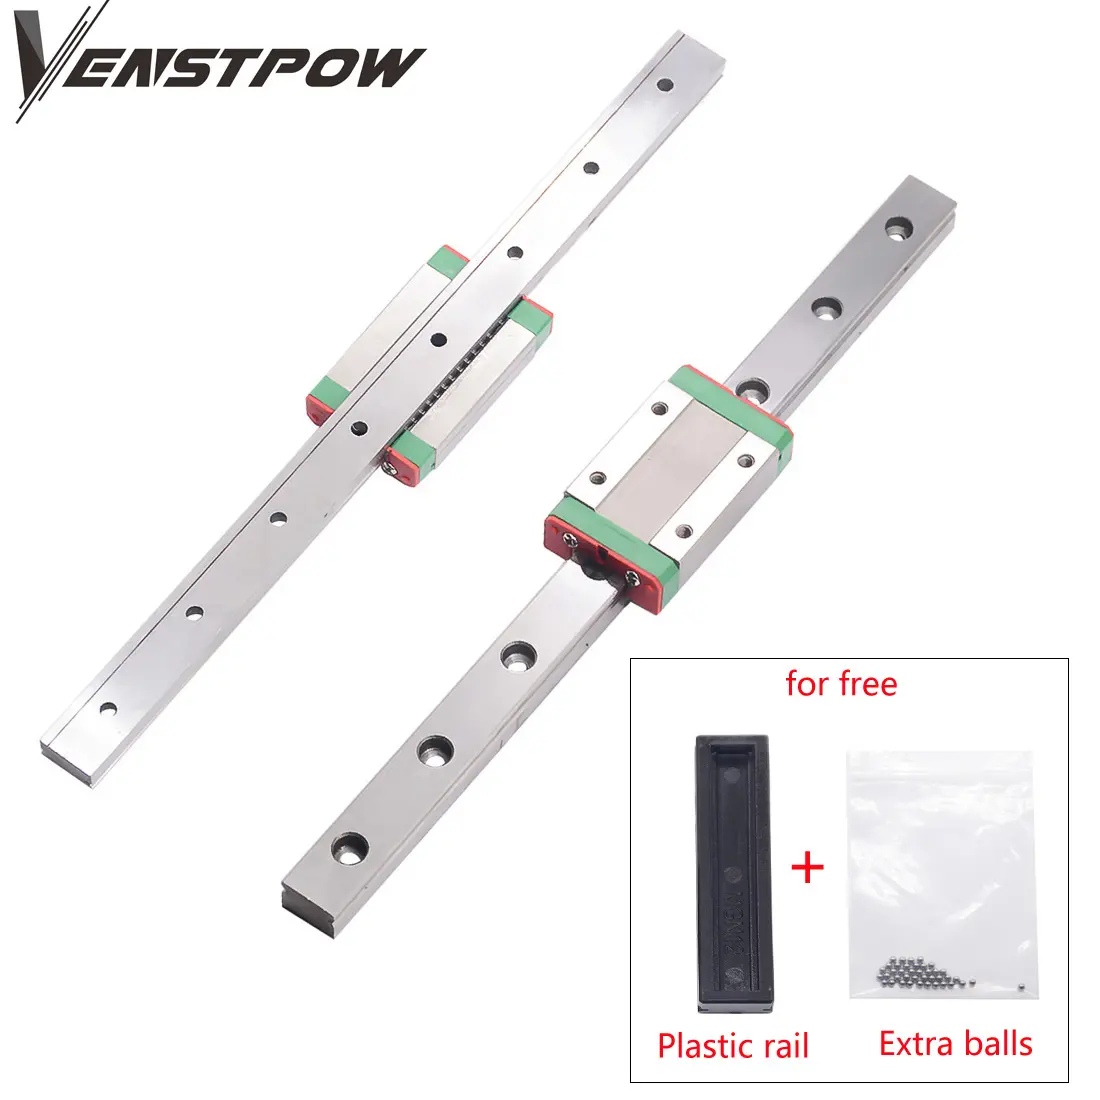 cnc parts MGN7 MGN12 MGN15 MGN9 100mm to 800mm miniature linear rail slide 1pcMGN linear guide+MGN carriage mini linear guide